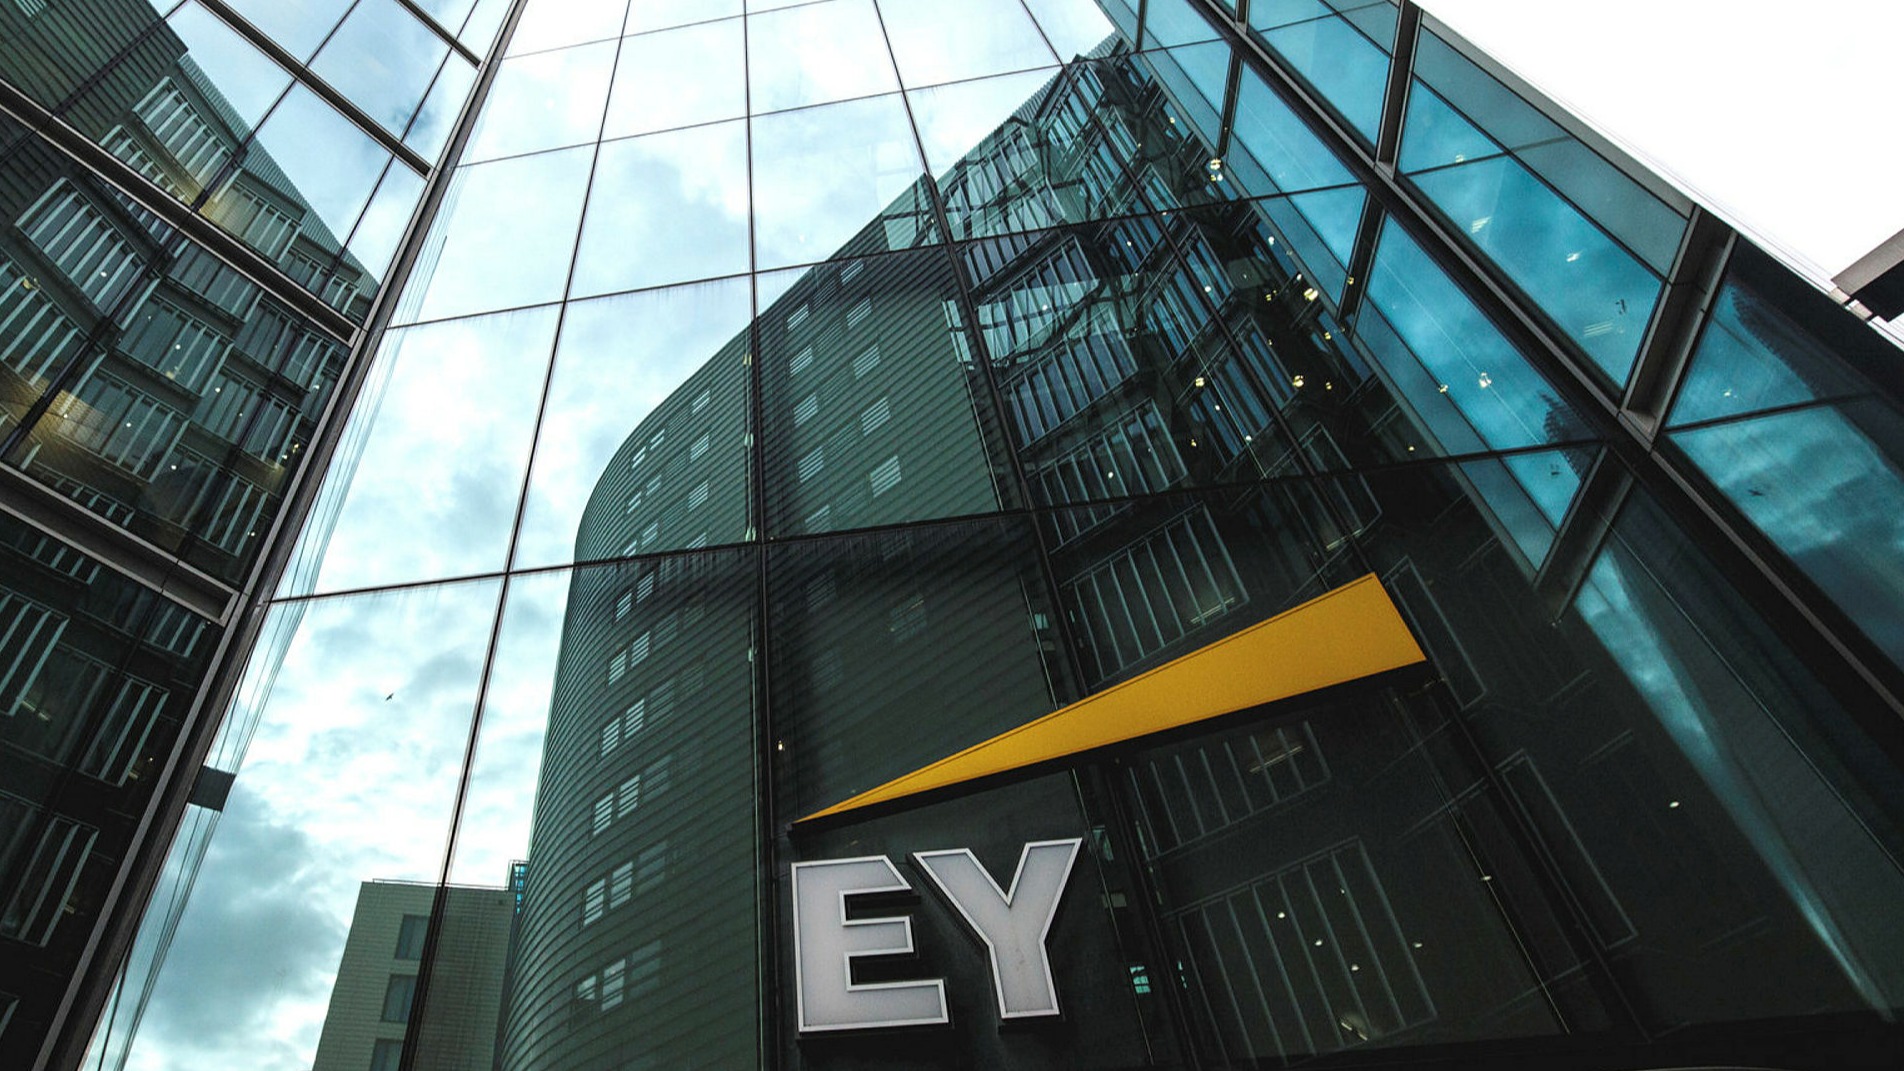 EY: Digital technology creates new standards and opportunities for the internal audit sector